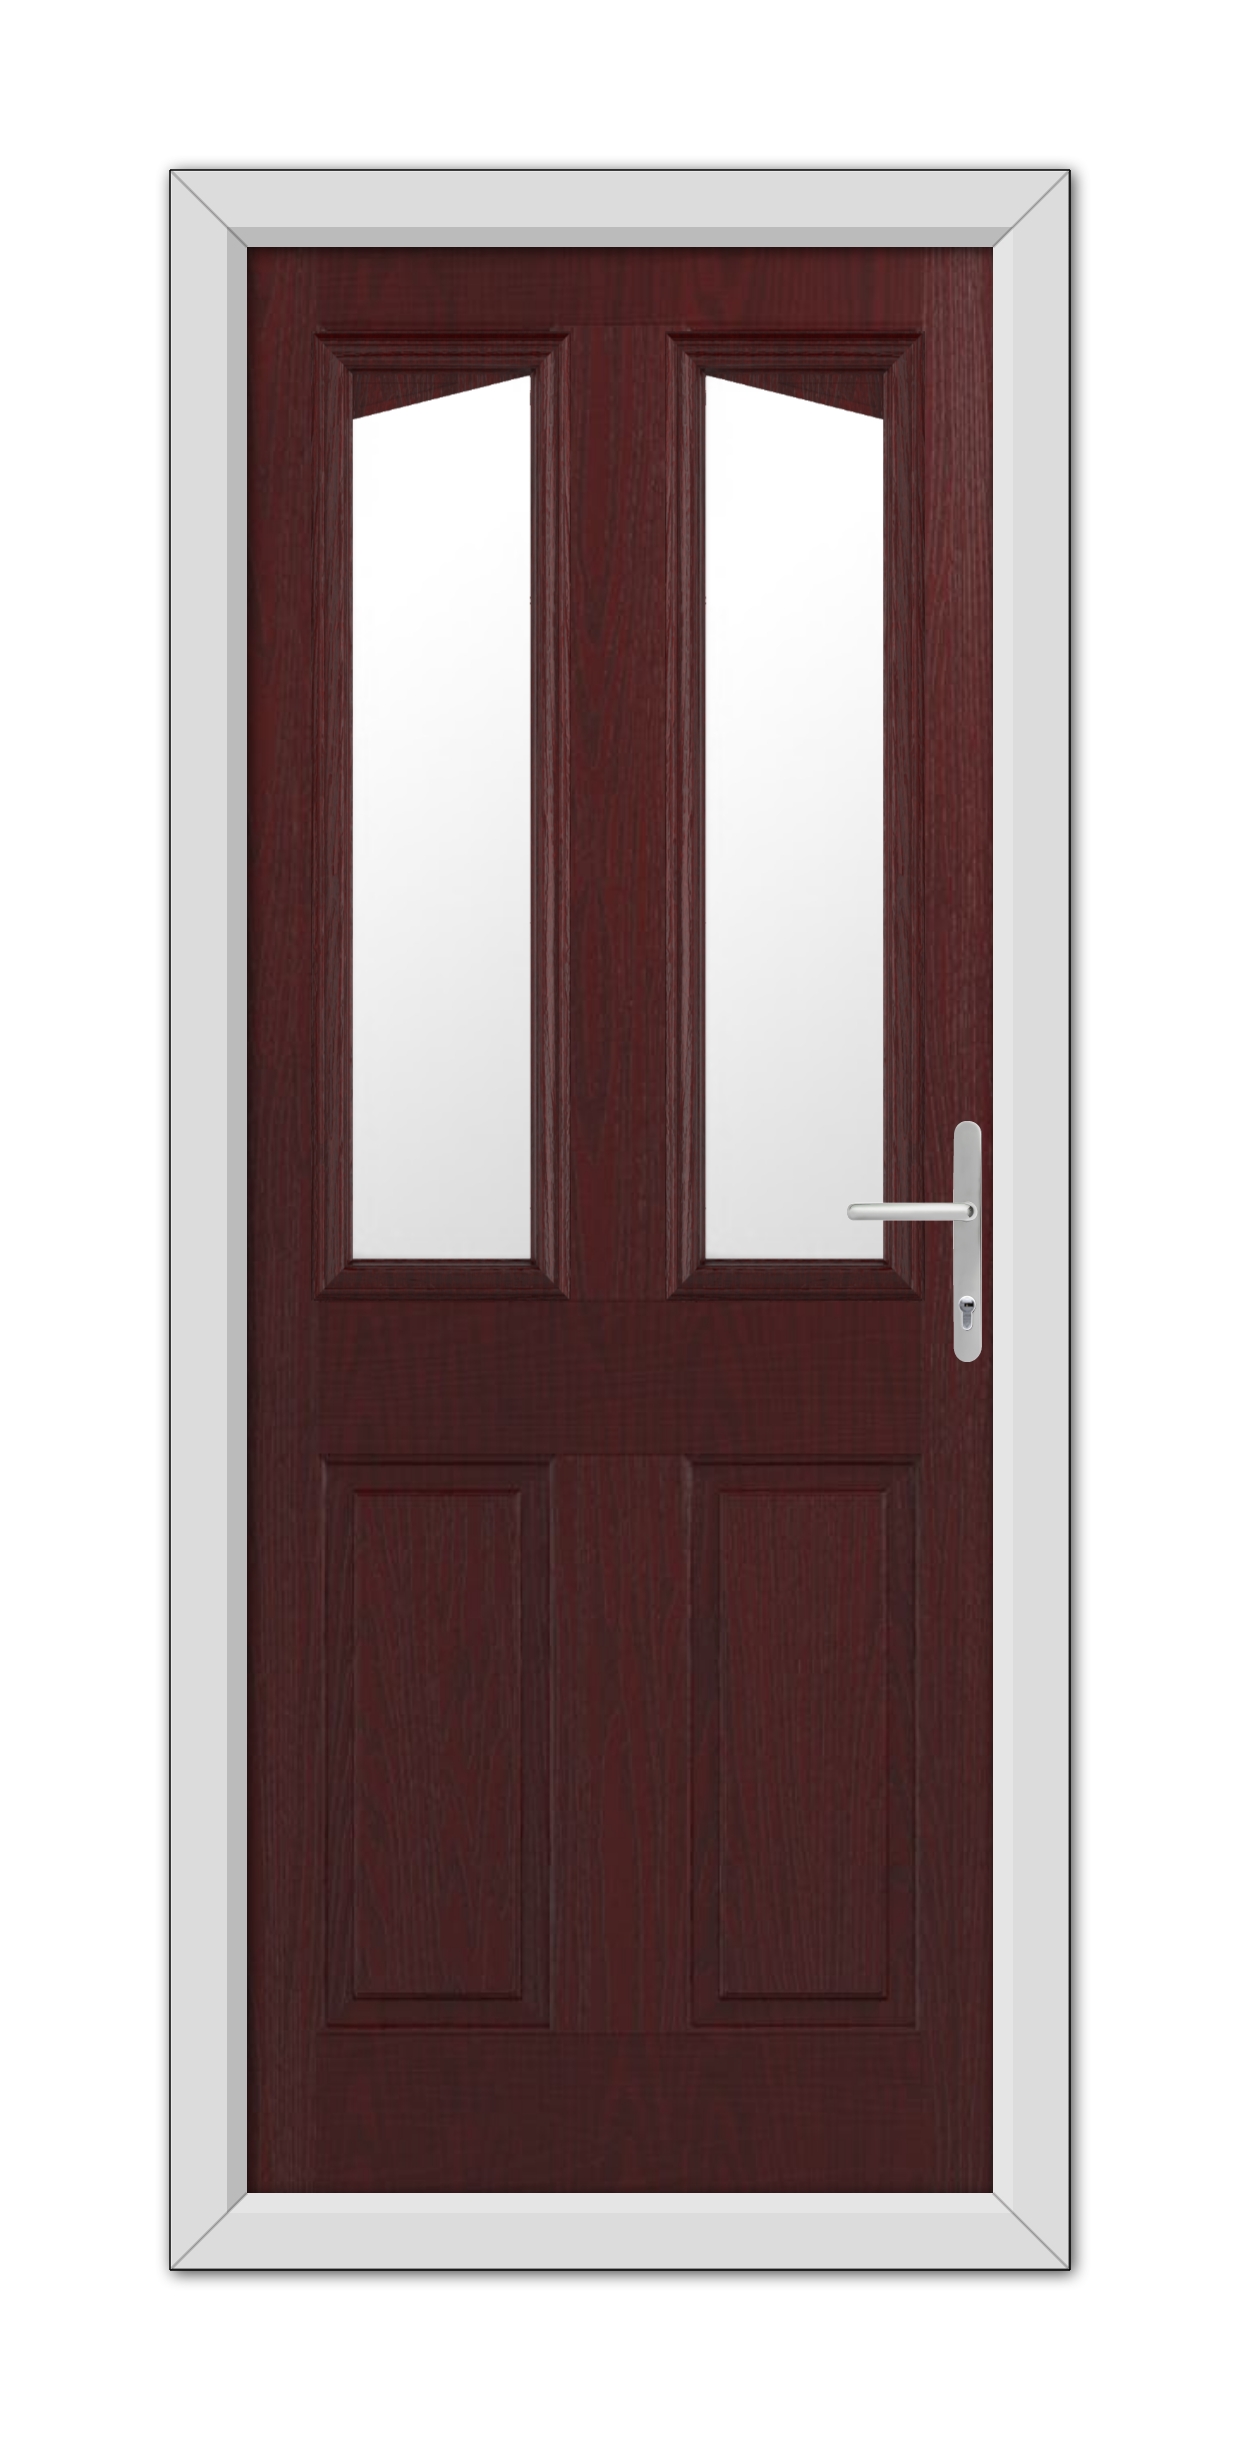 A modern Rosewood Highbury Composite Door 48mm Timber Core with two vertical glass panels, framed in white, and equipped with a silver handle on the right side.